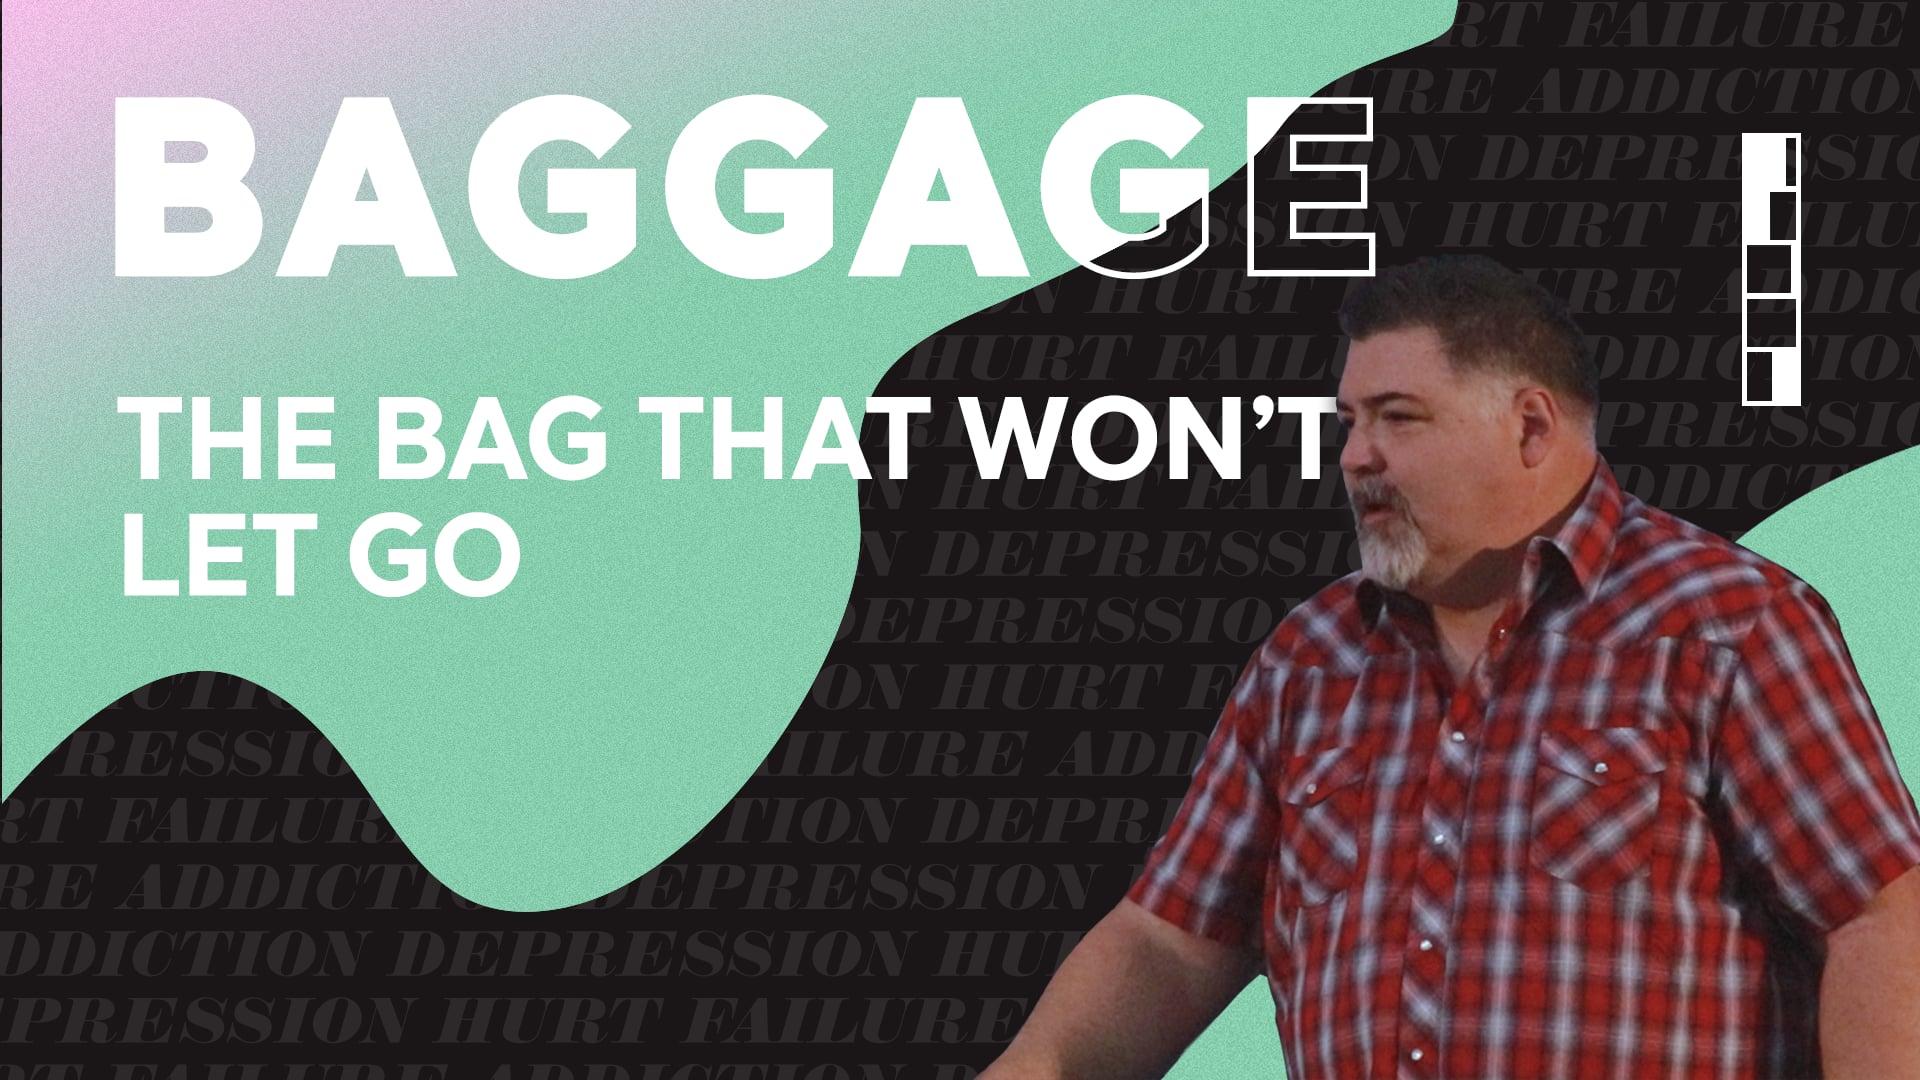 Baggage: The Bag That Won’t Let Go